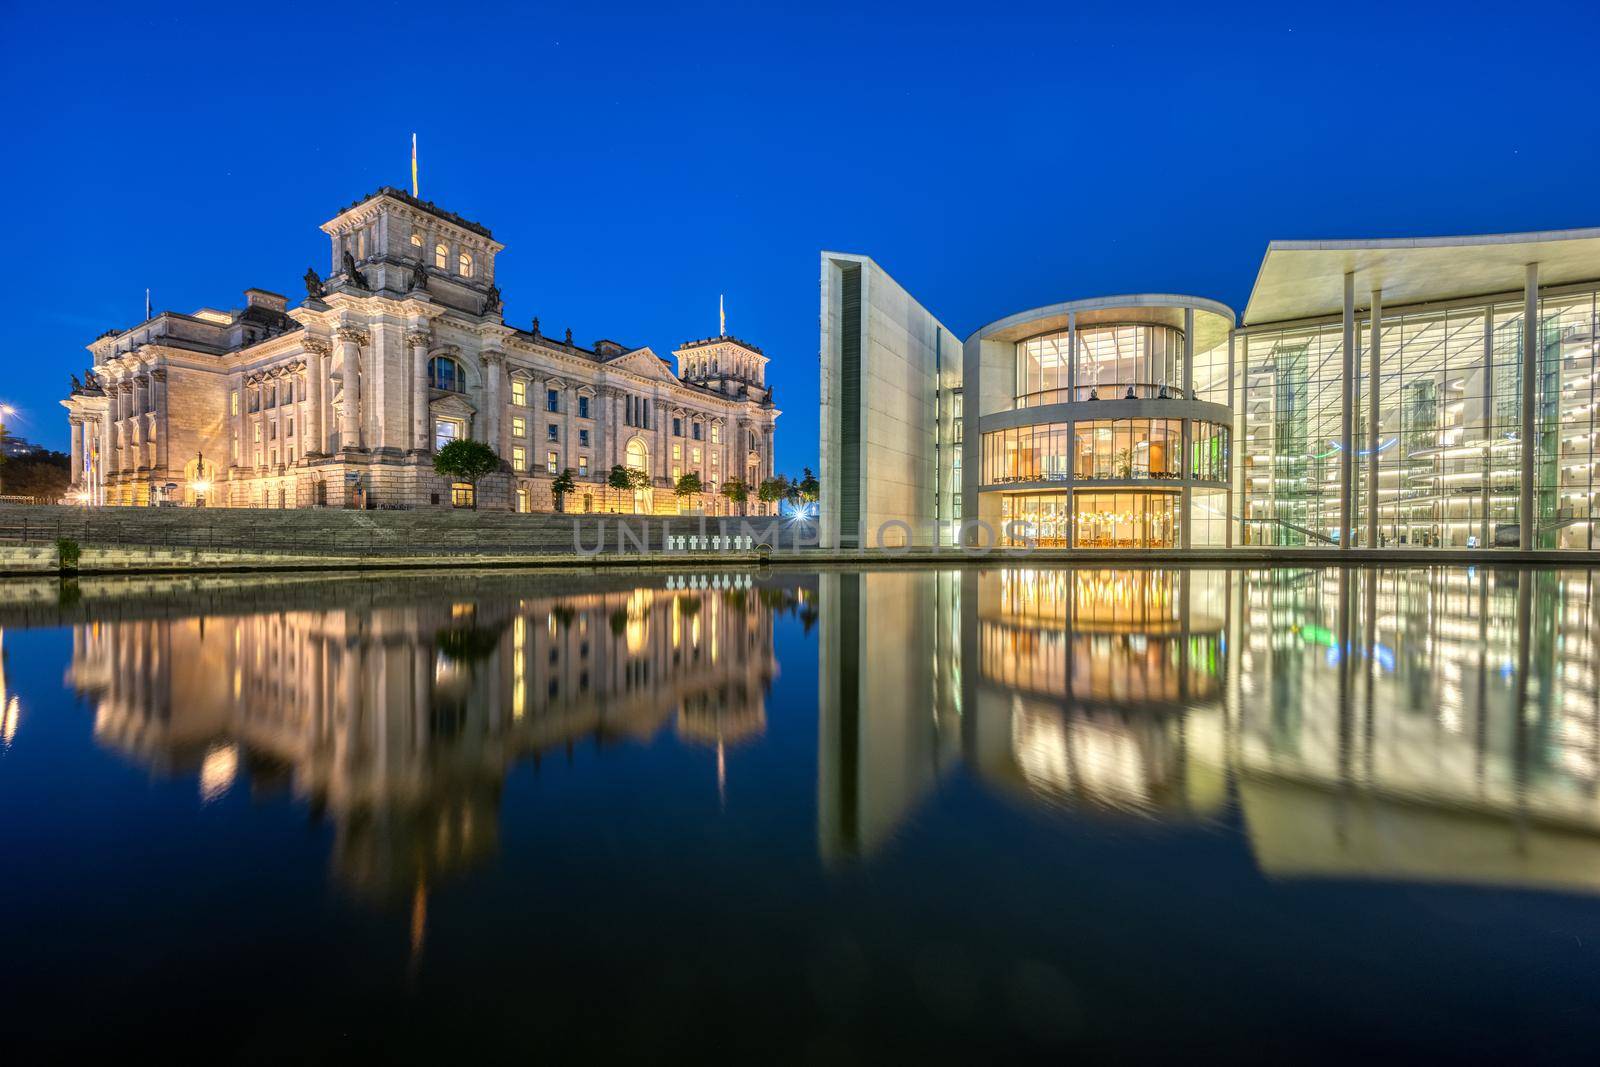 The Reichstag and the Paul-Loebe-Haus at night by elxeneize